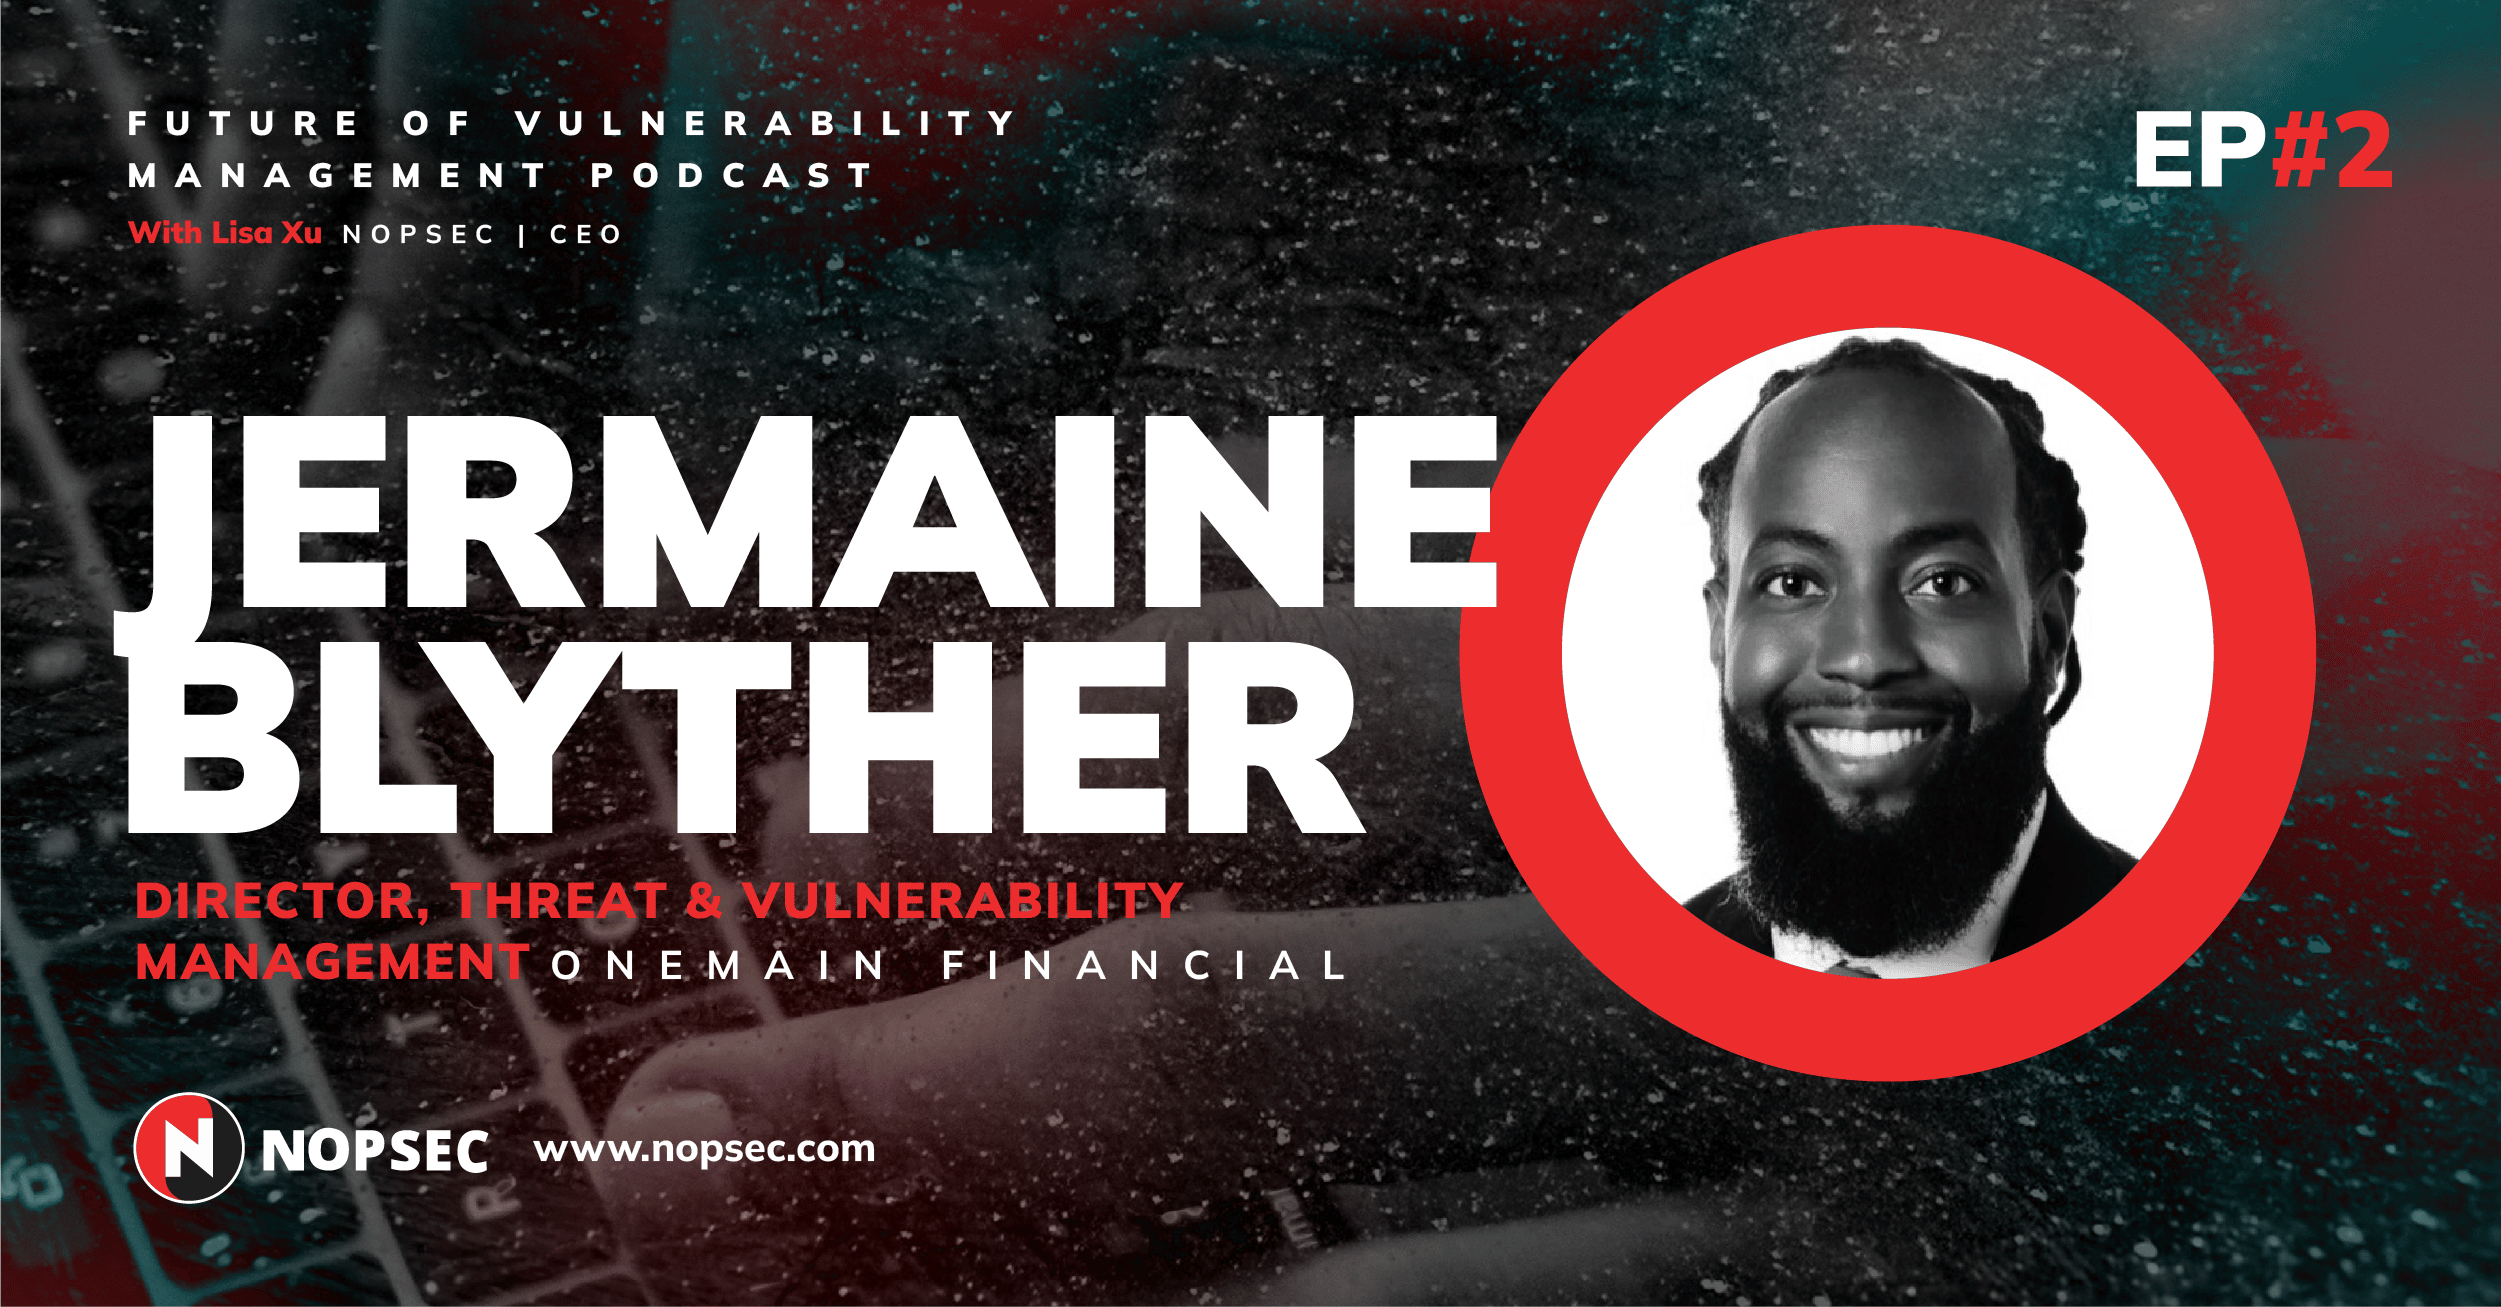 Future of Vulnerability Management Podcast Episode 2 Featuring Jermaine Blyther